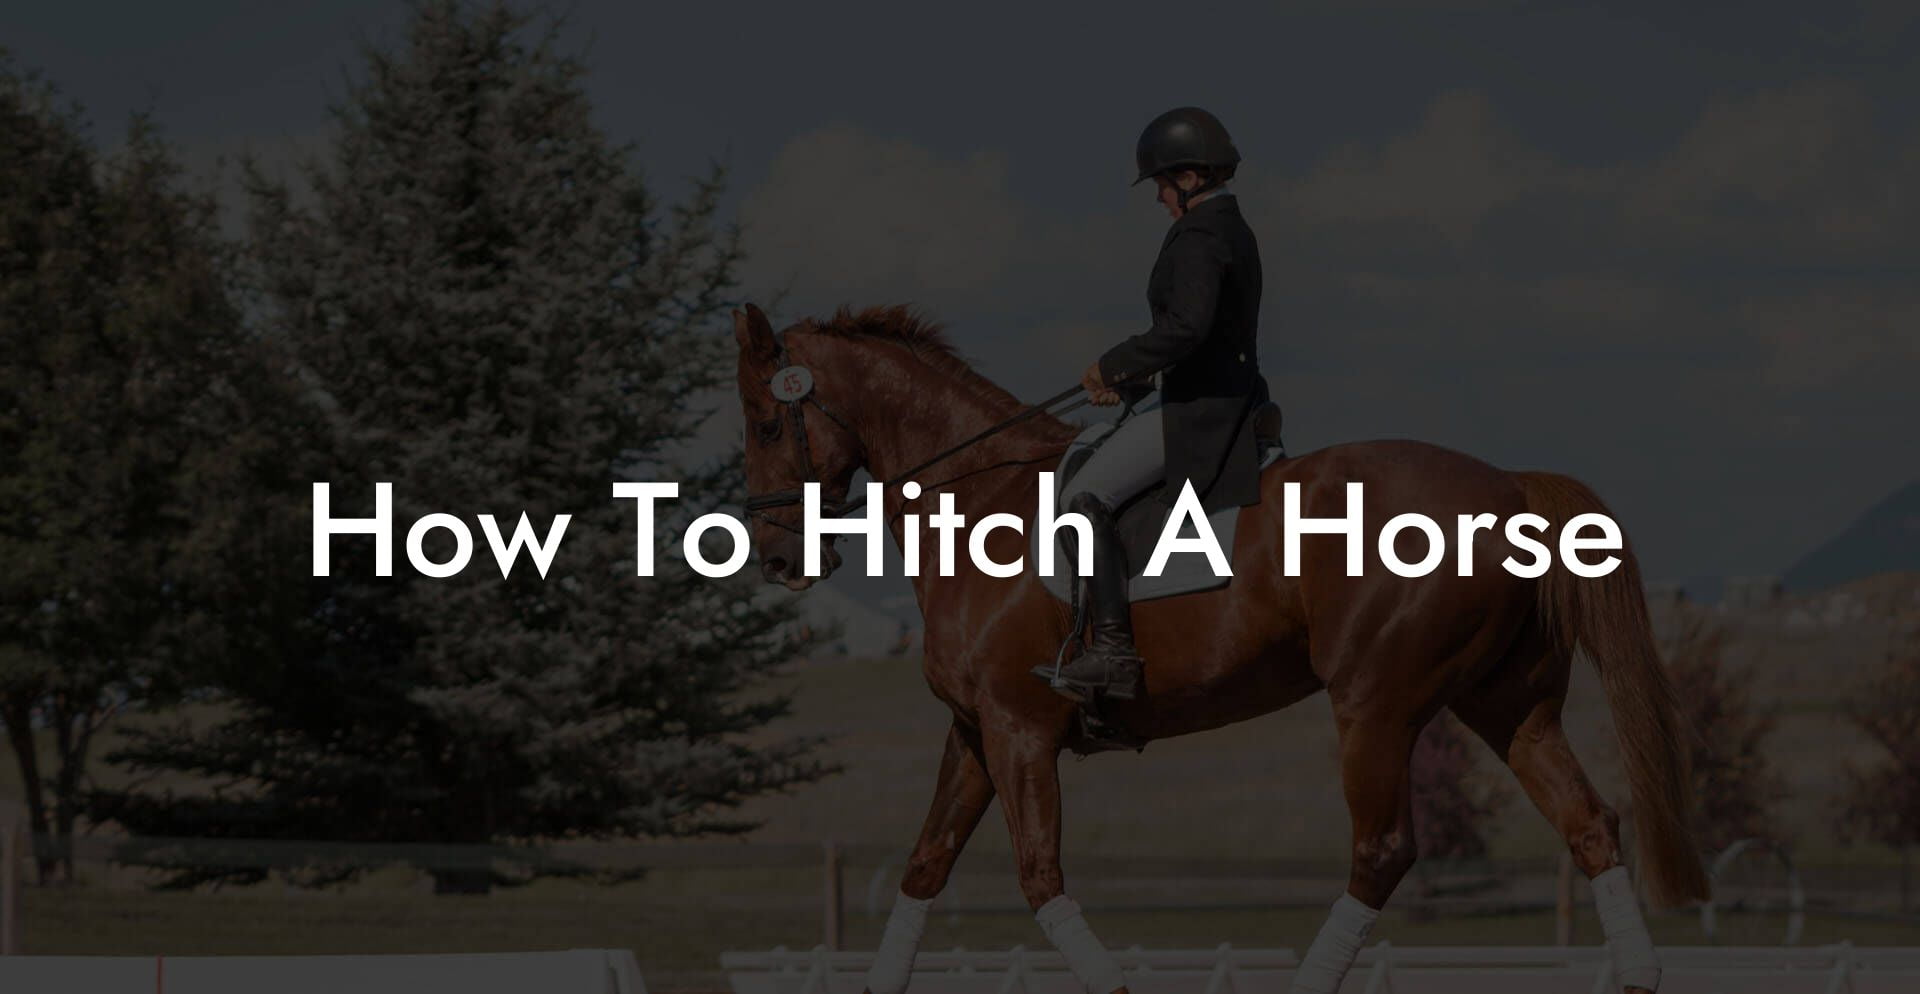 How To Hitch A Horse